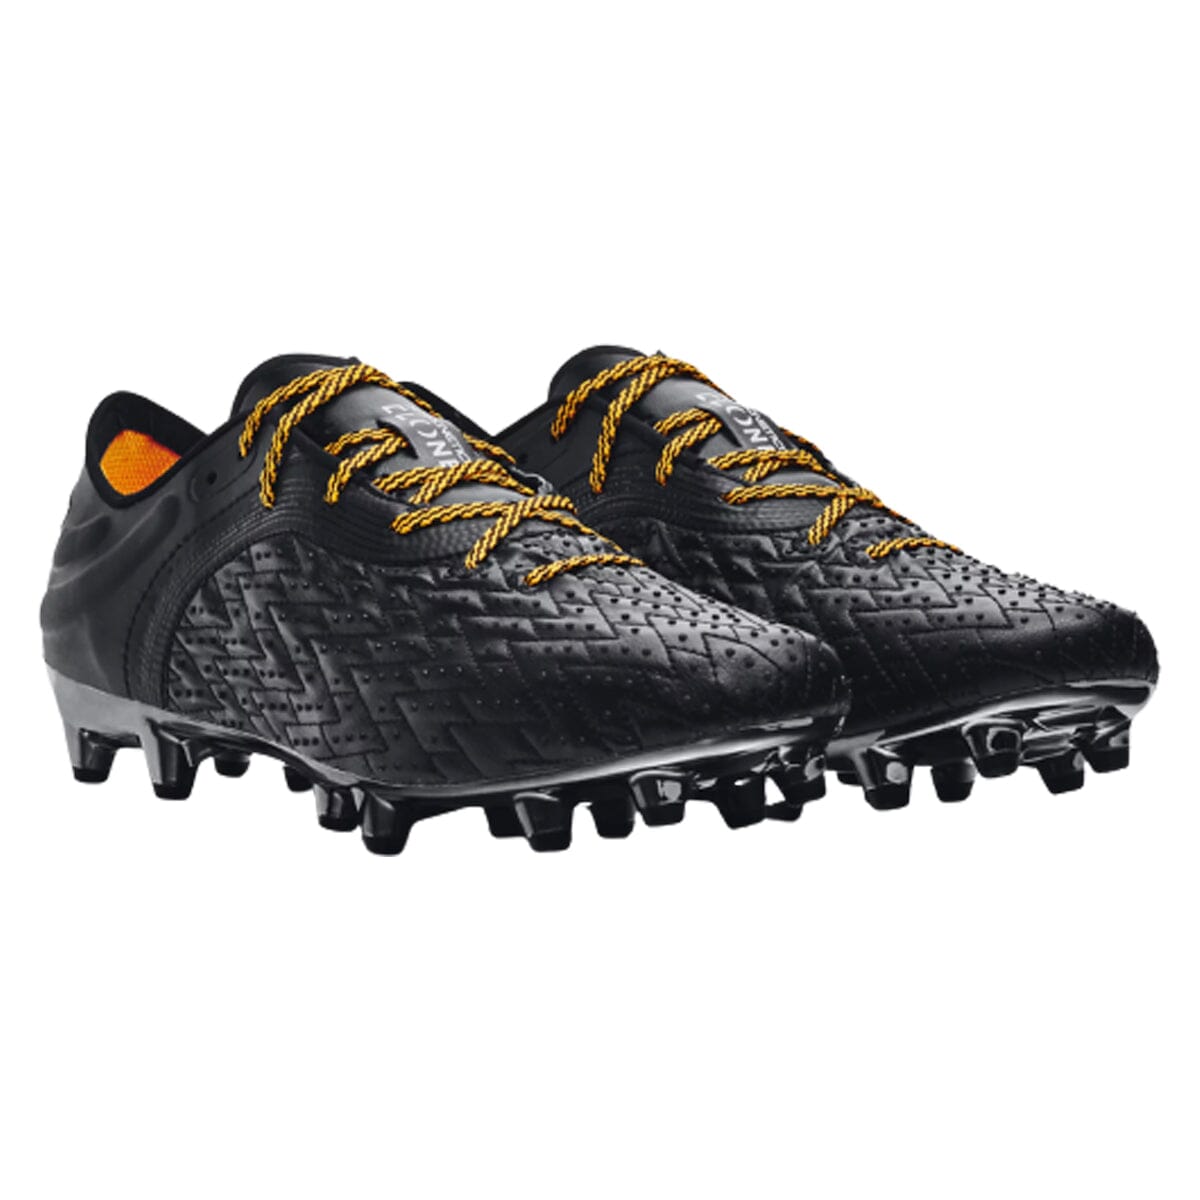 Under Armour Men's UA Clone Magnetico Pro 2 FG Soccer Cleats | 3025640-001 Cleats Under Armour 